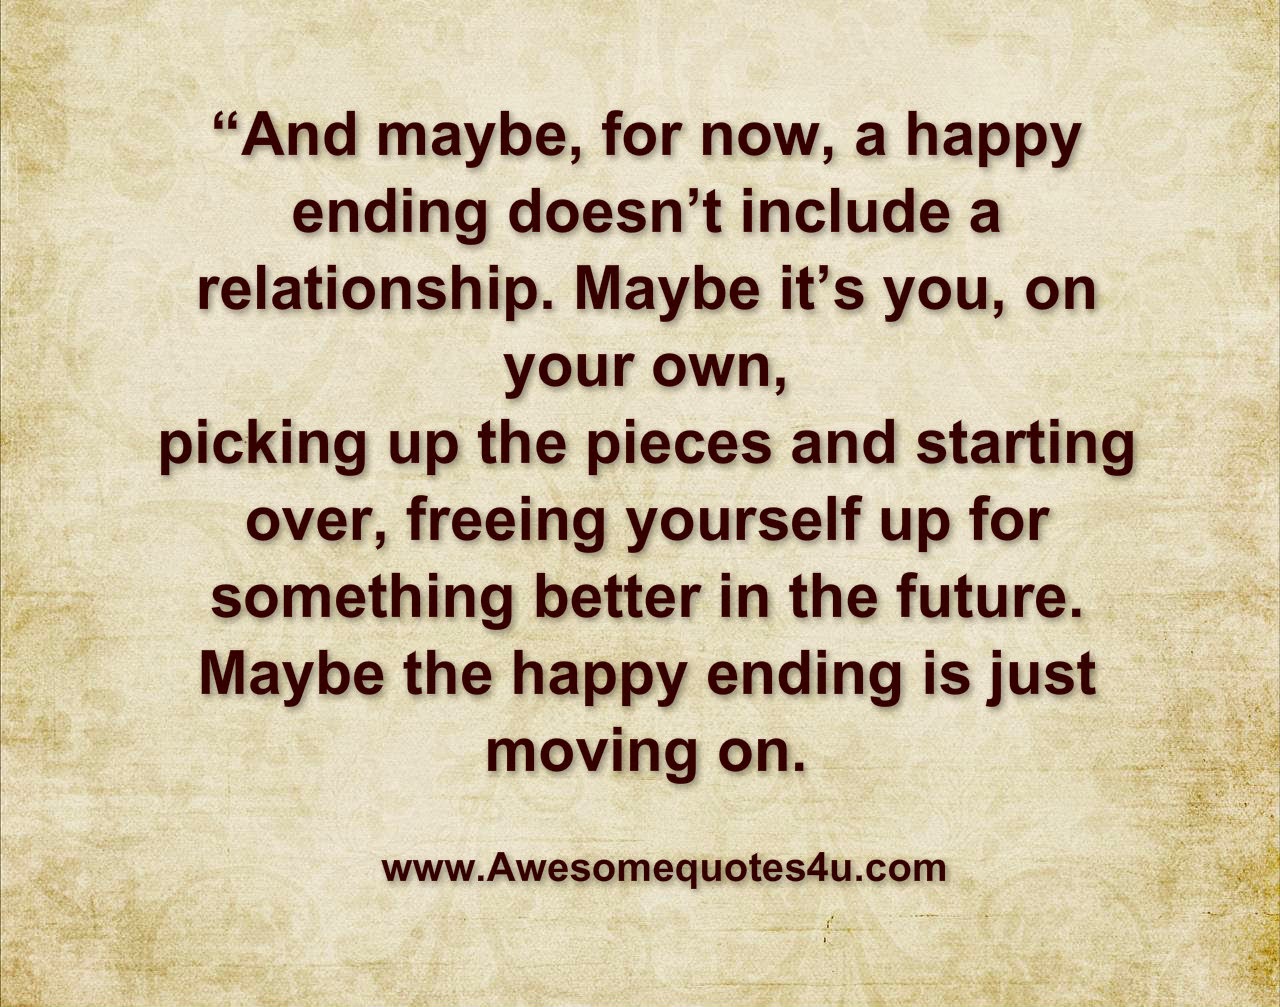 Awesome Quotes Just Moving on â¤ Quotes About Love Ending